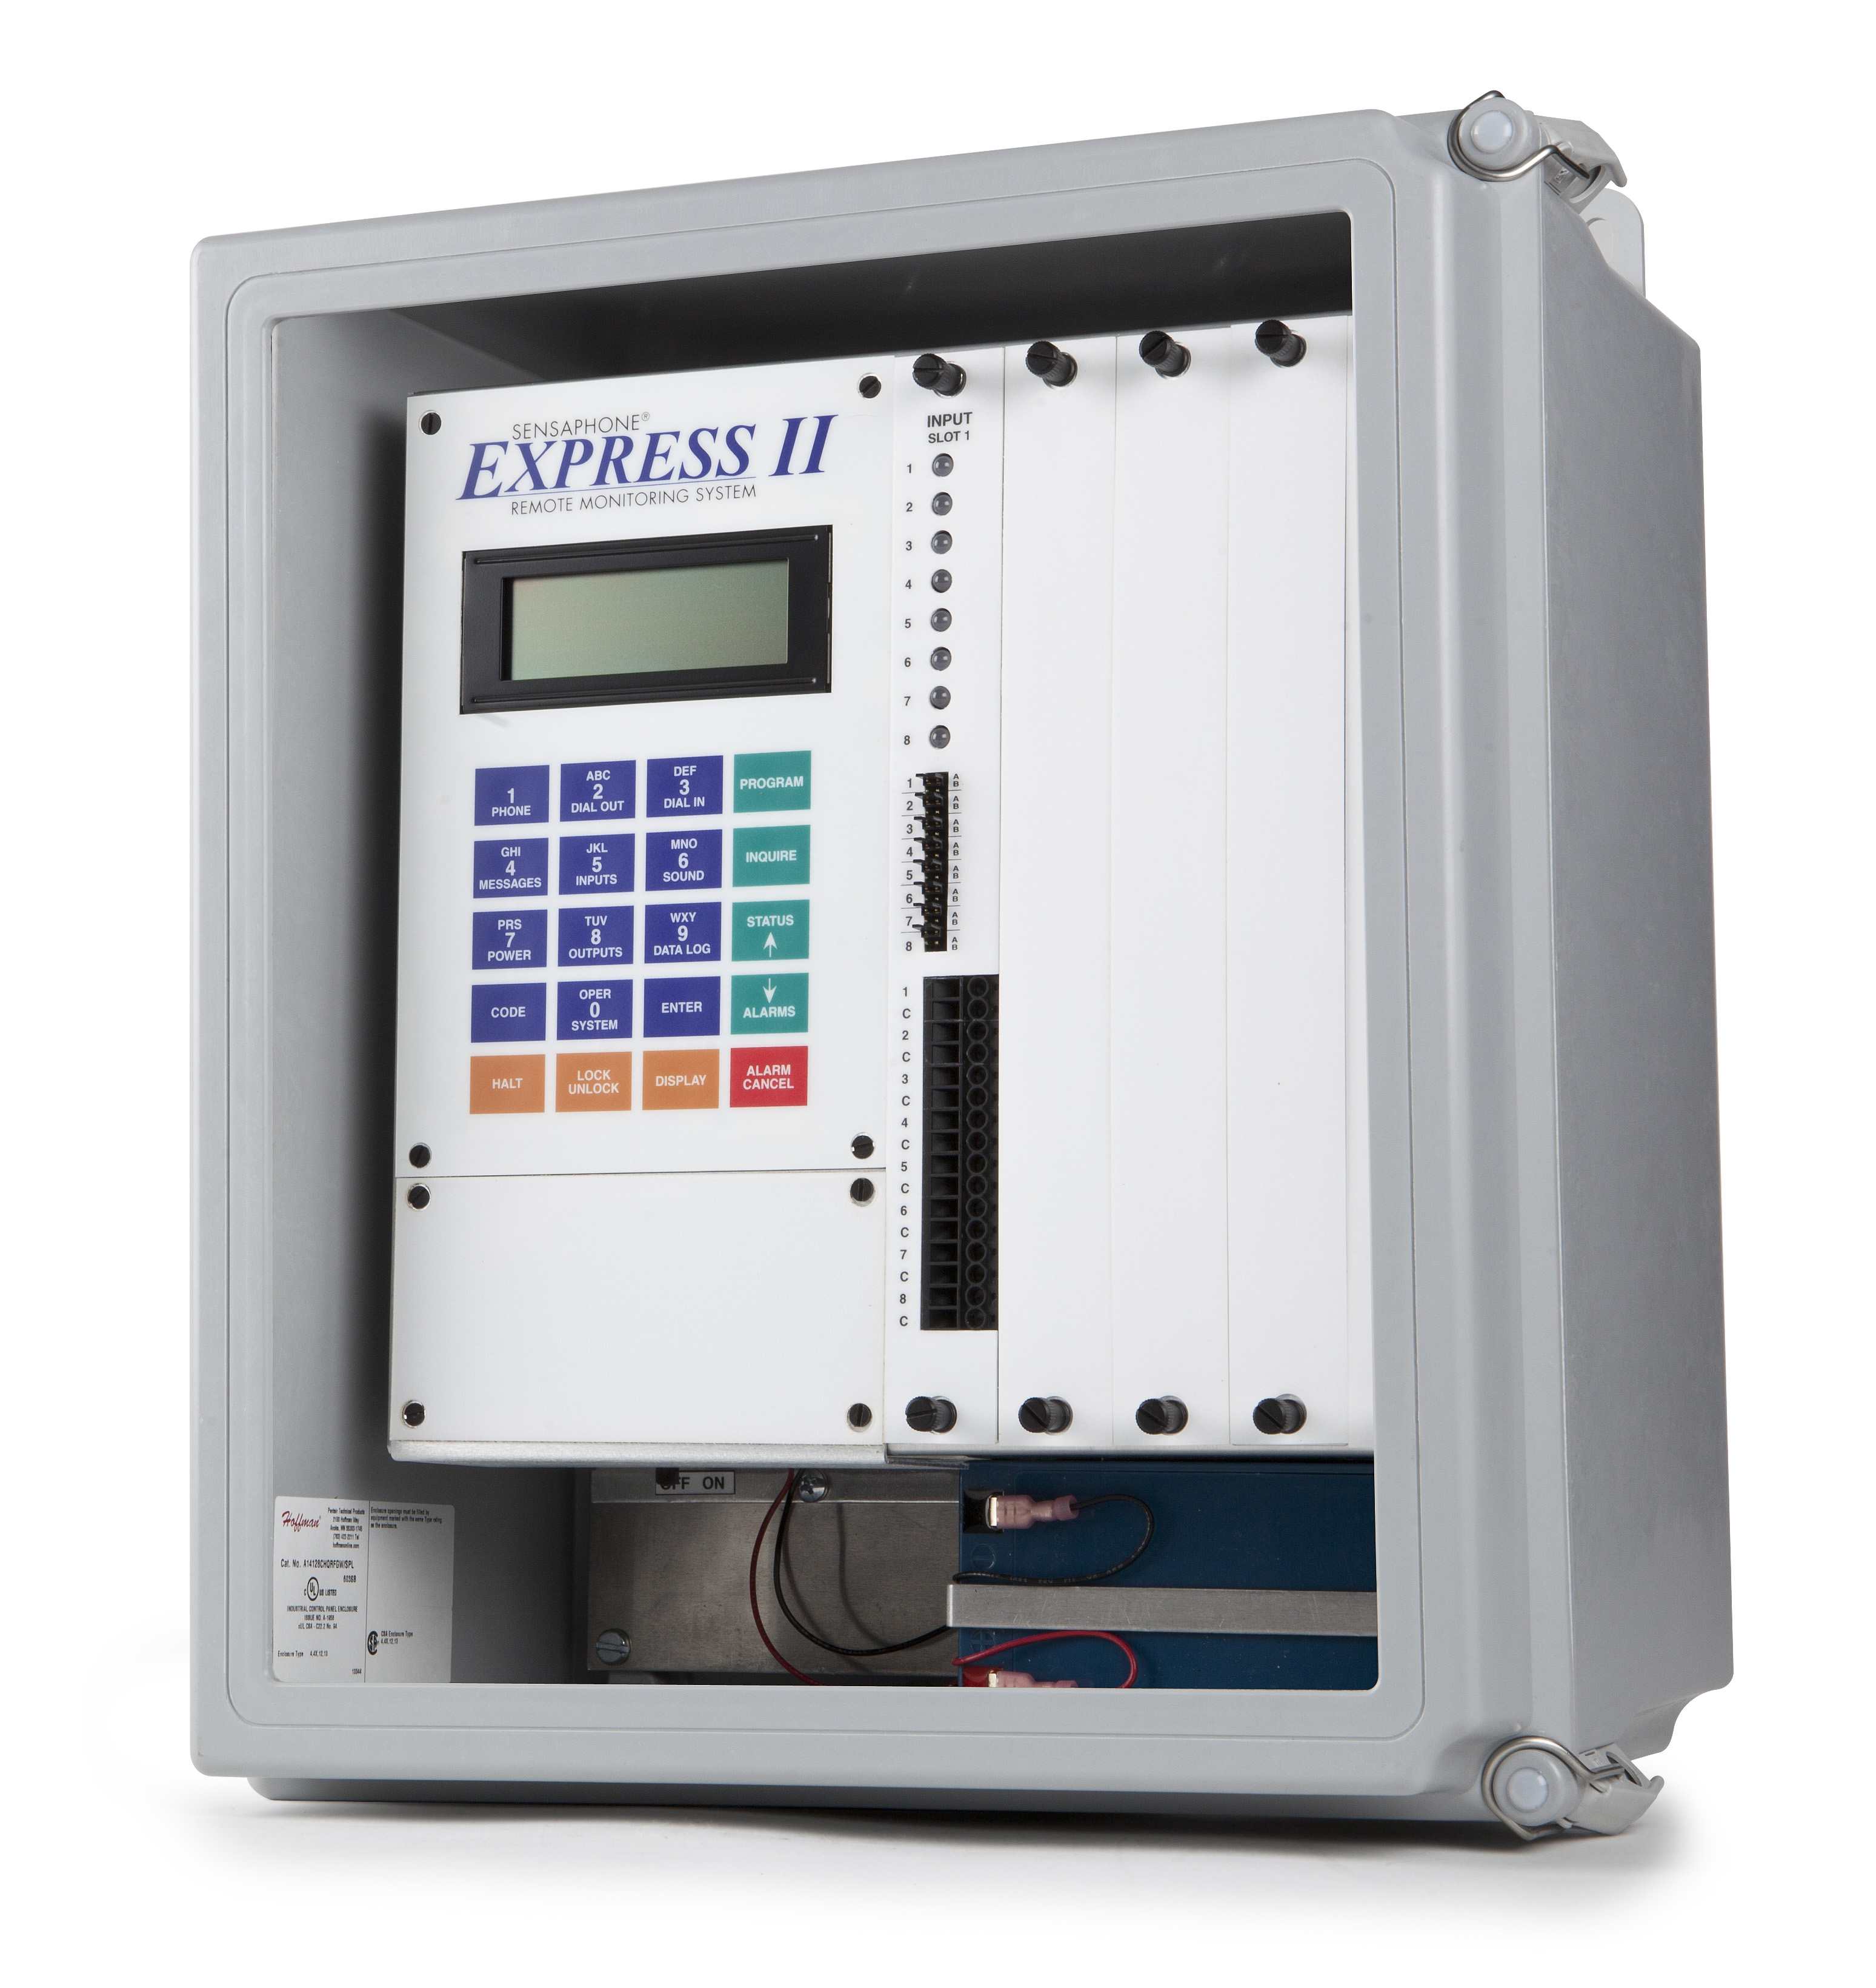 The Express II system is expandable to include up to 40 channels.